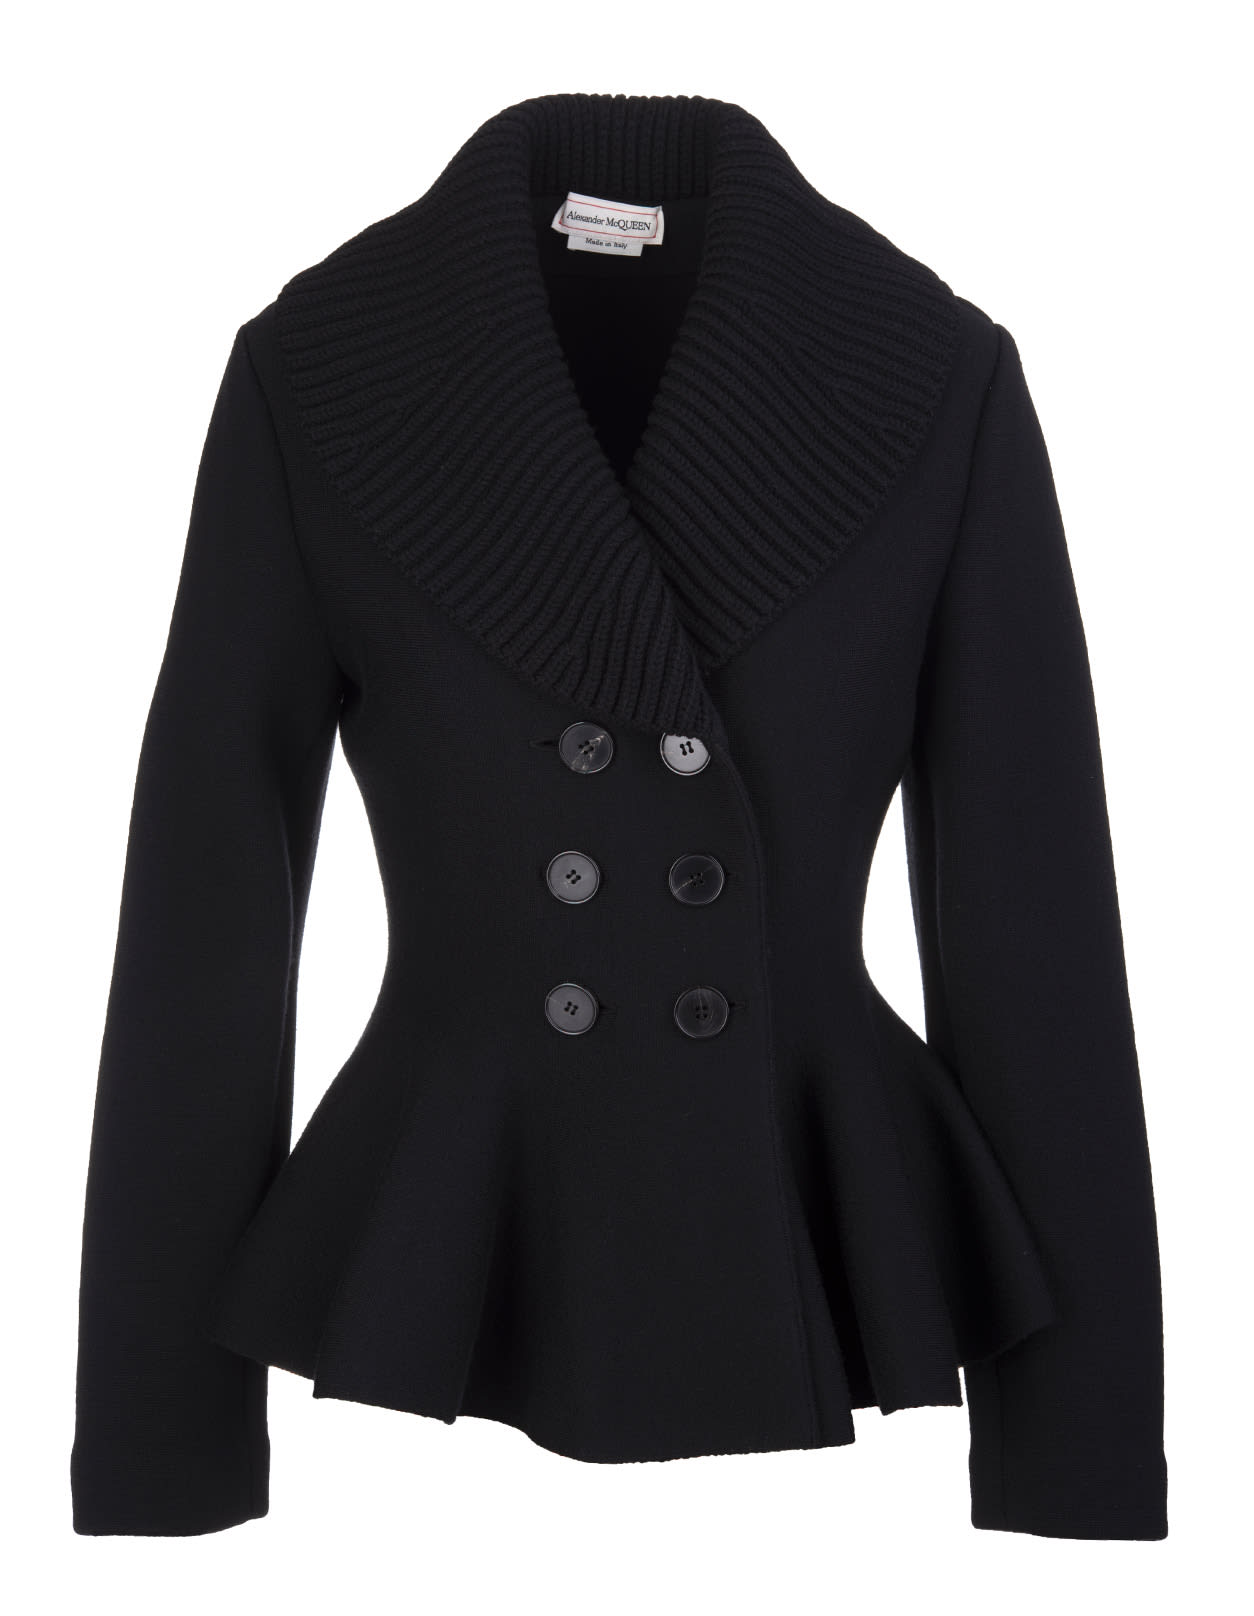 Alexander McQueen Black Double-breasted Knitted Jacket With Ruffles